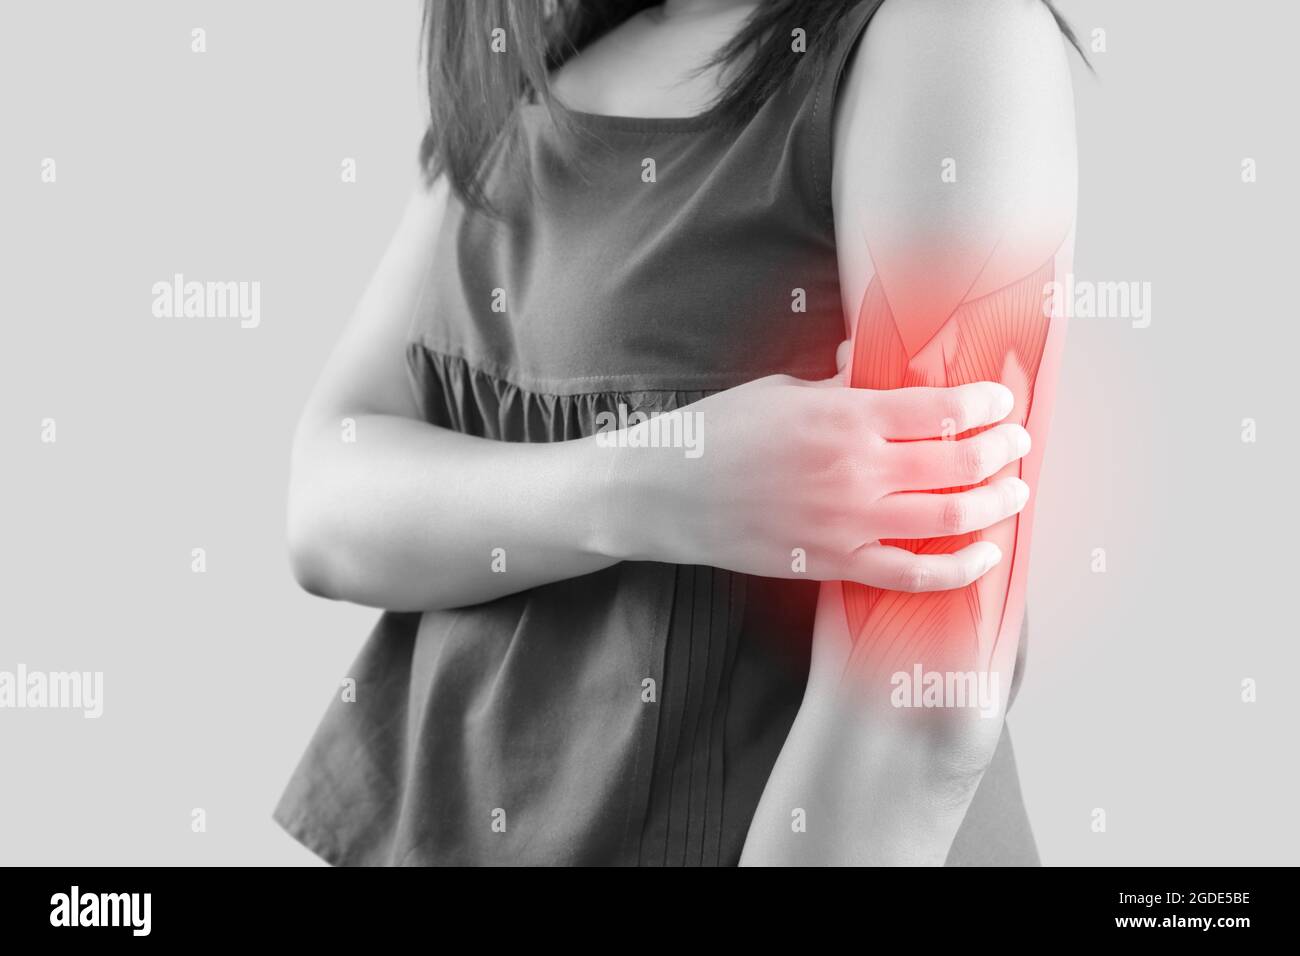 People who experience muscle aches, Upper arm pain, Woman with body-muscles problem, Healthcare And Medicine concept Stock Photo